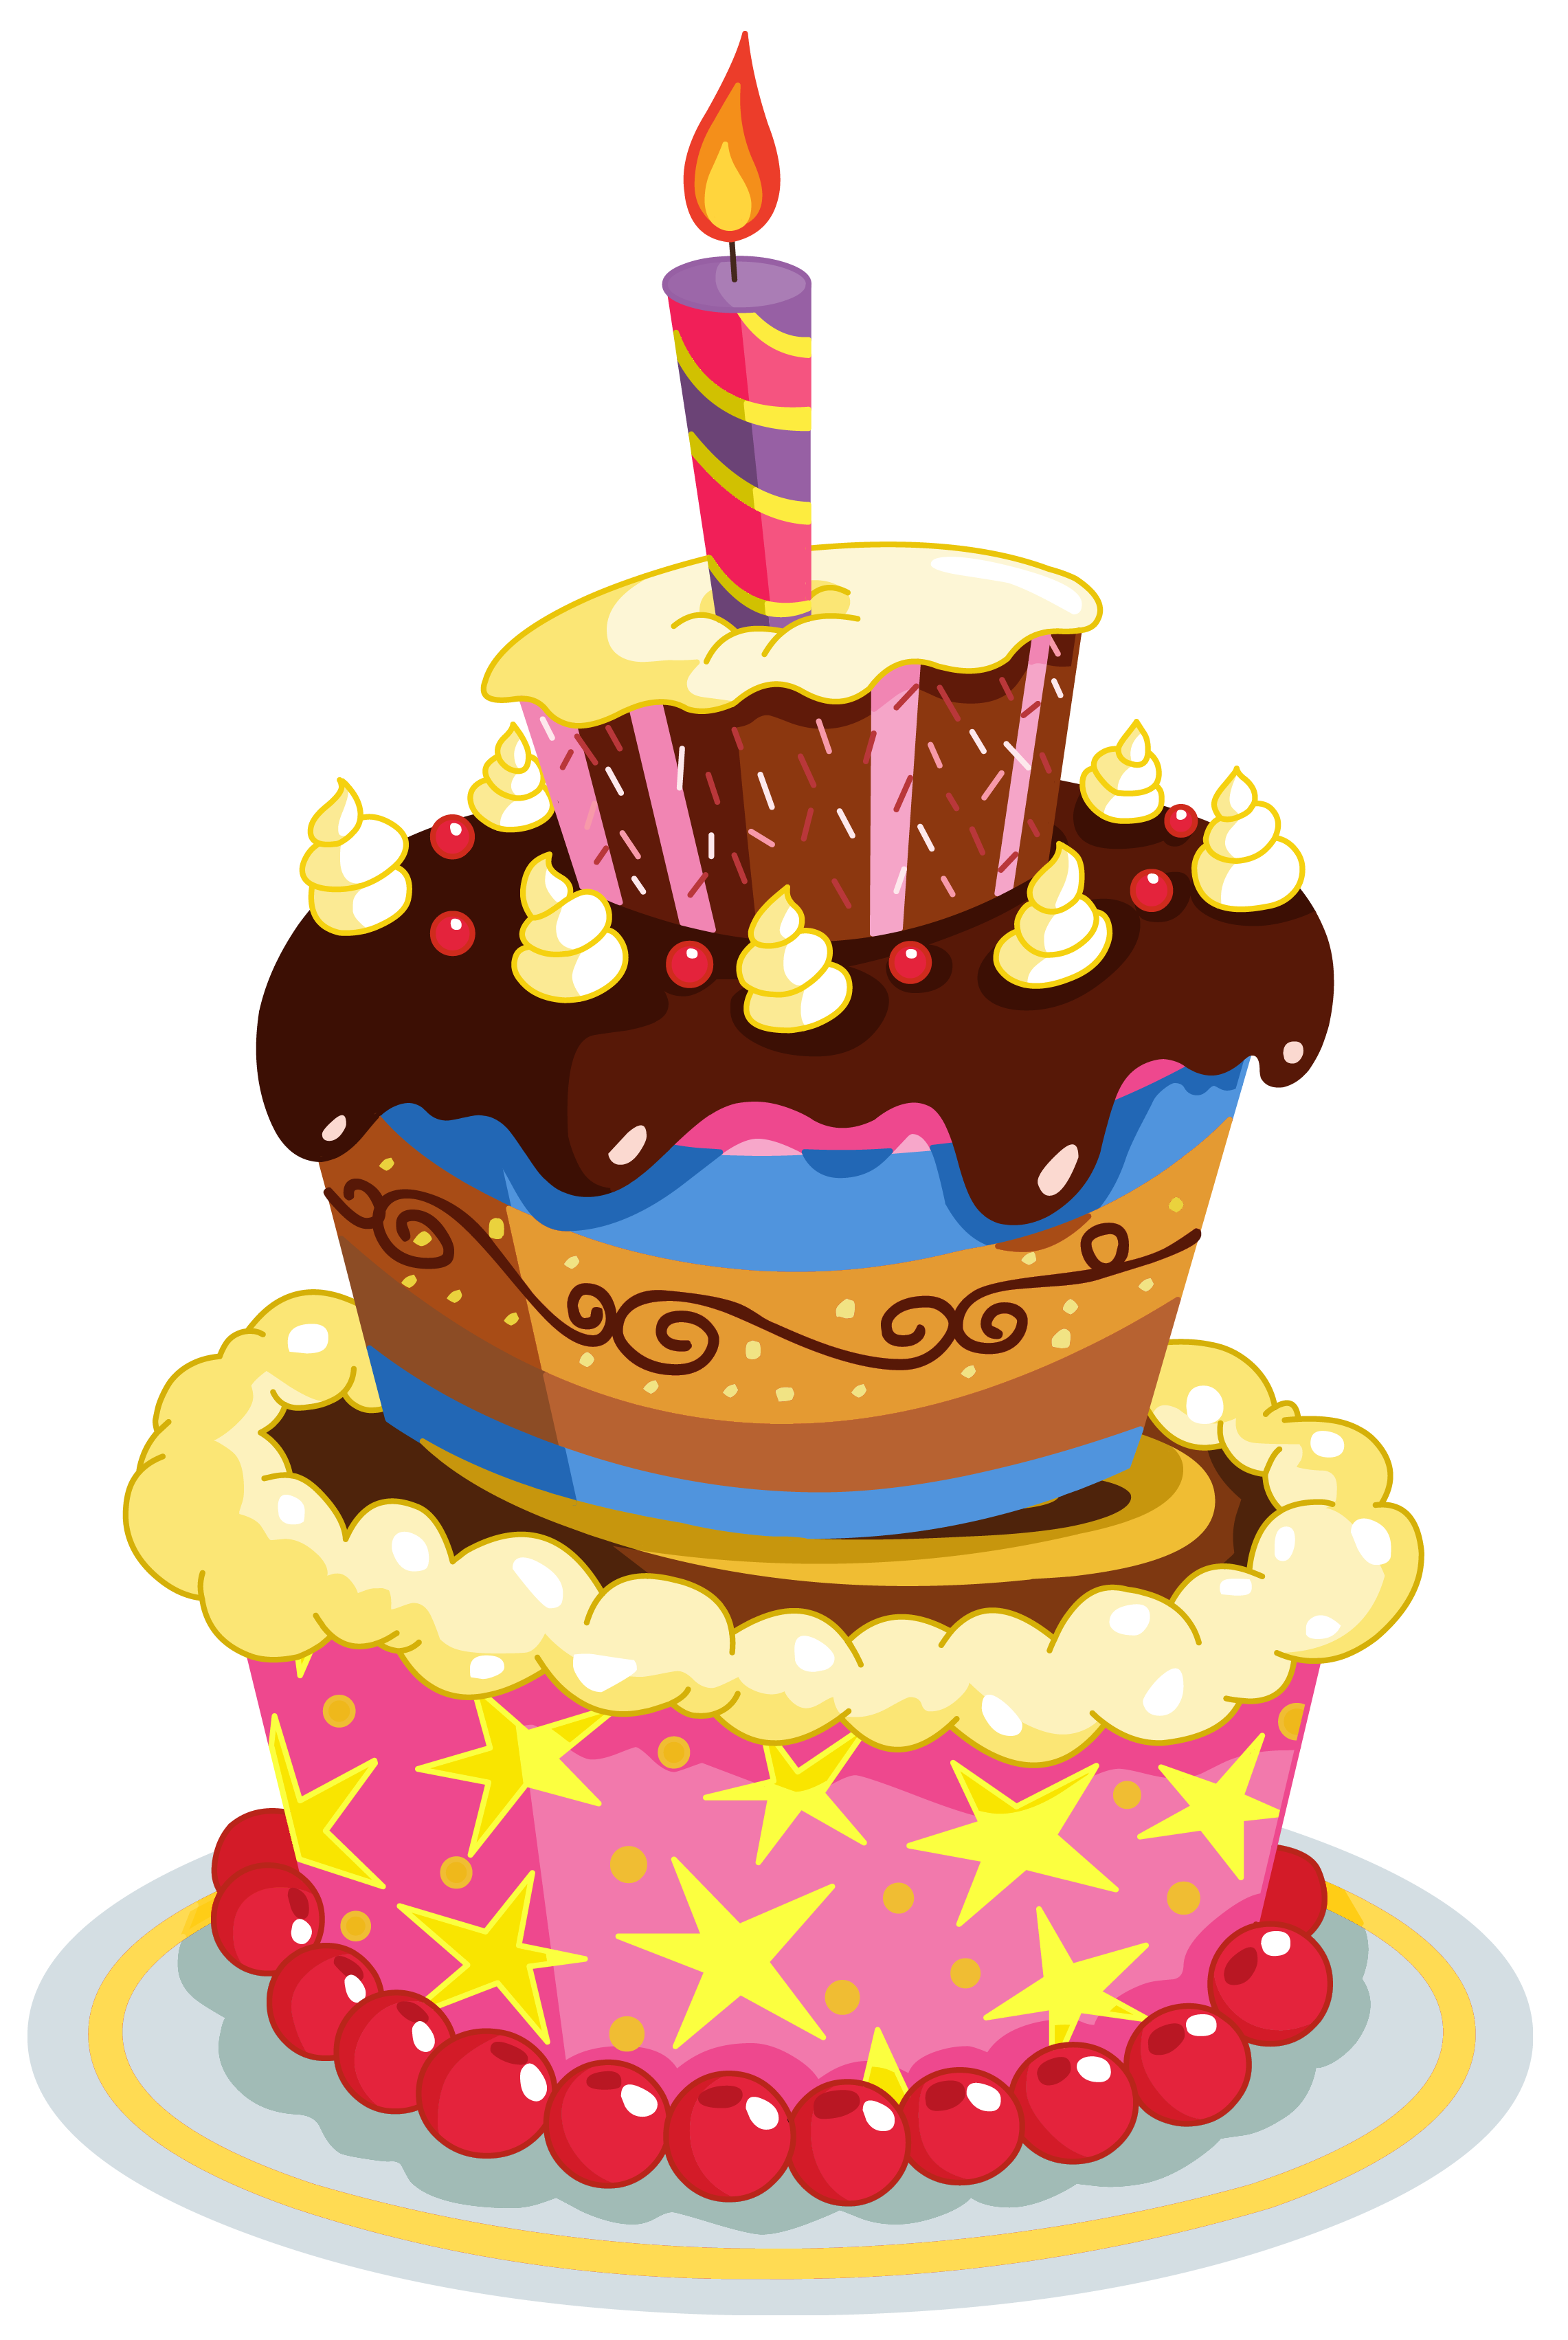 Happy Birthday Cake PNG Clipart Image  Gallery Yopriceville   HighQuality Free Images and Transparent PNG Clipart